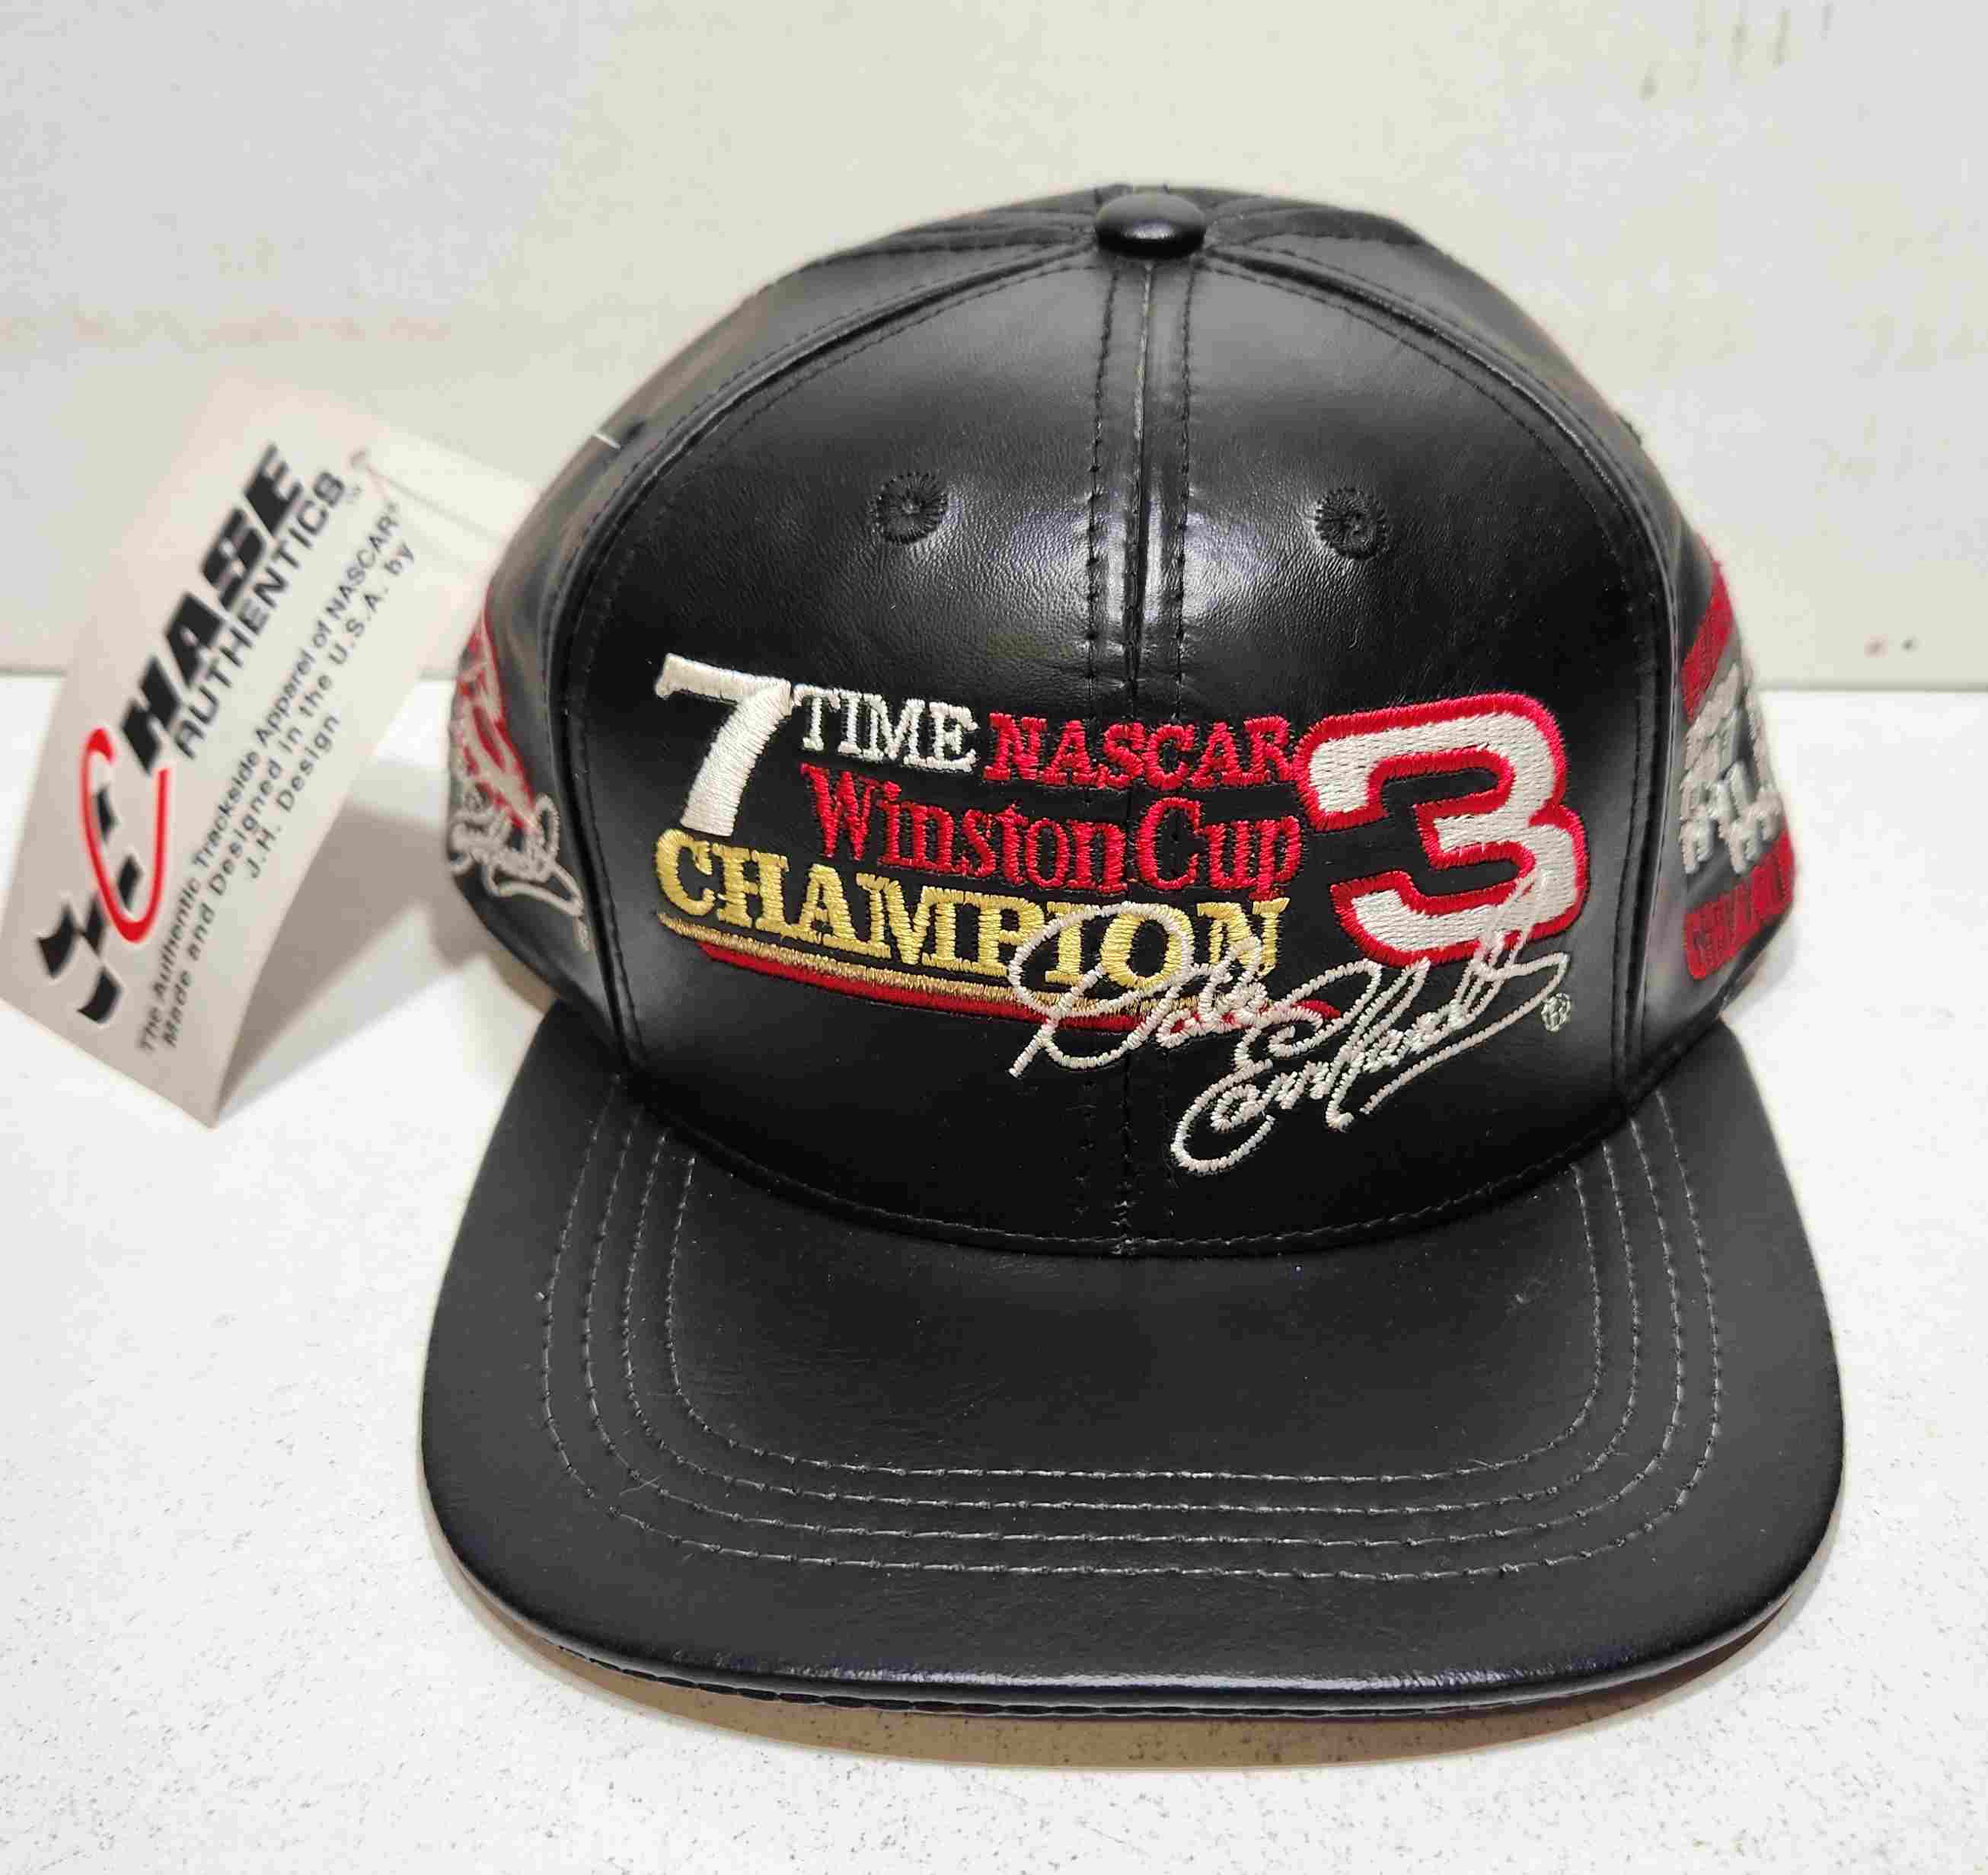 2001 Dale Earnhardt 7X Winston Cup Champion Black Leather Cap by Chase